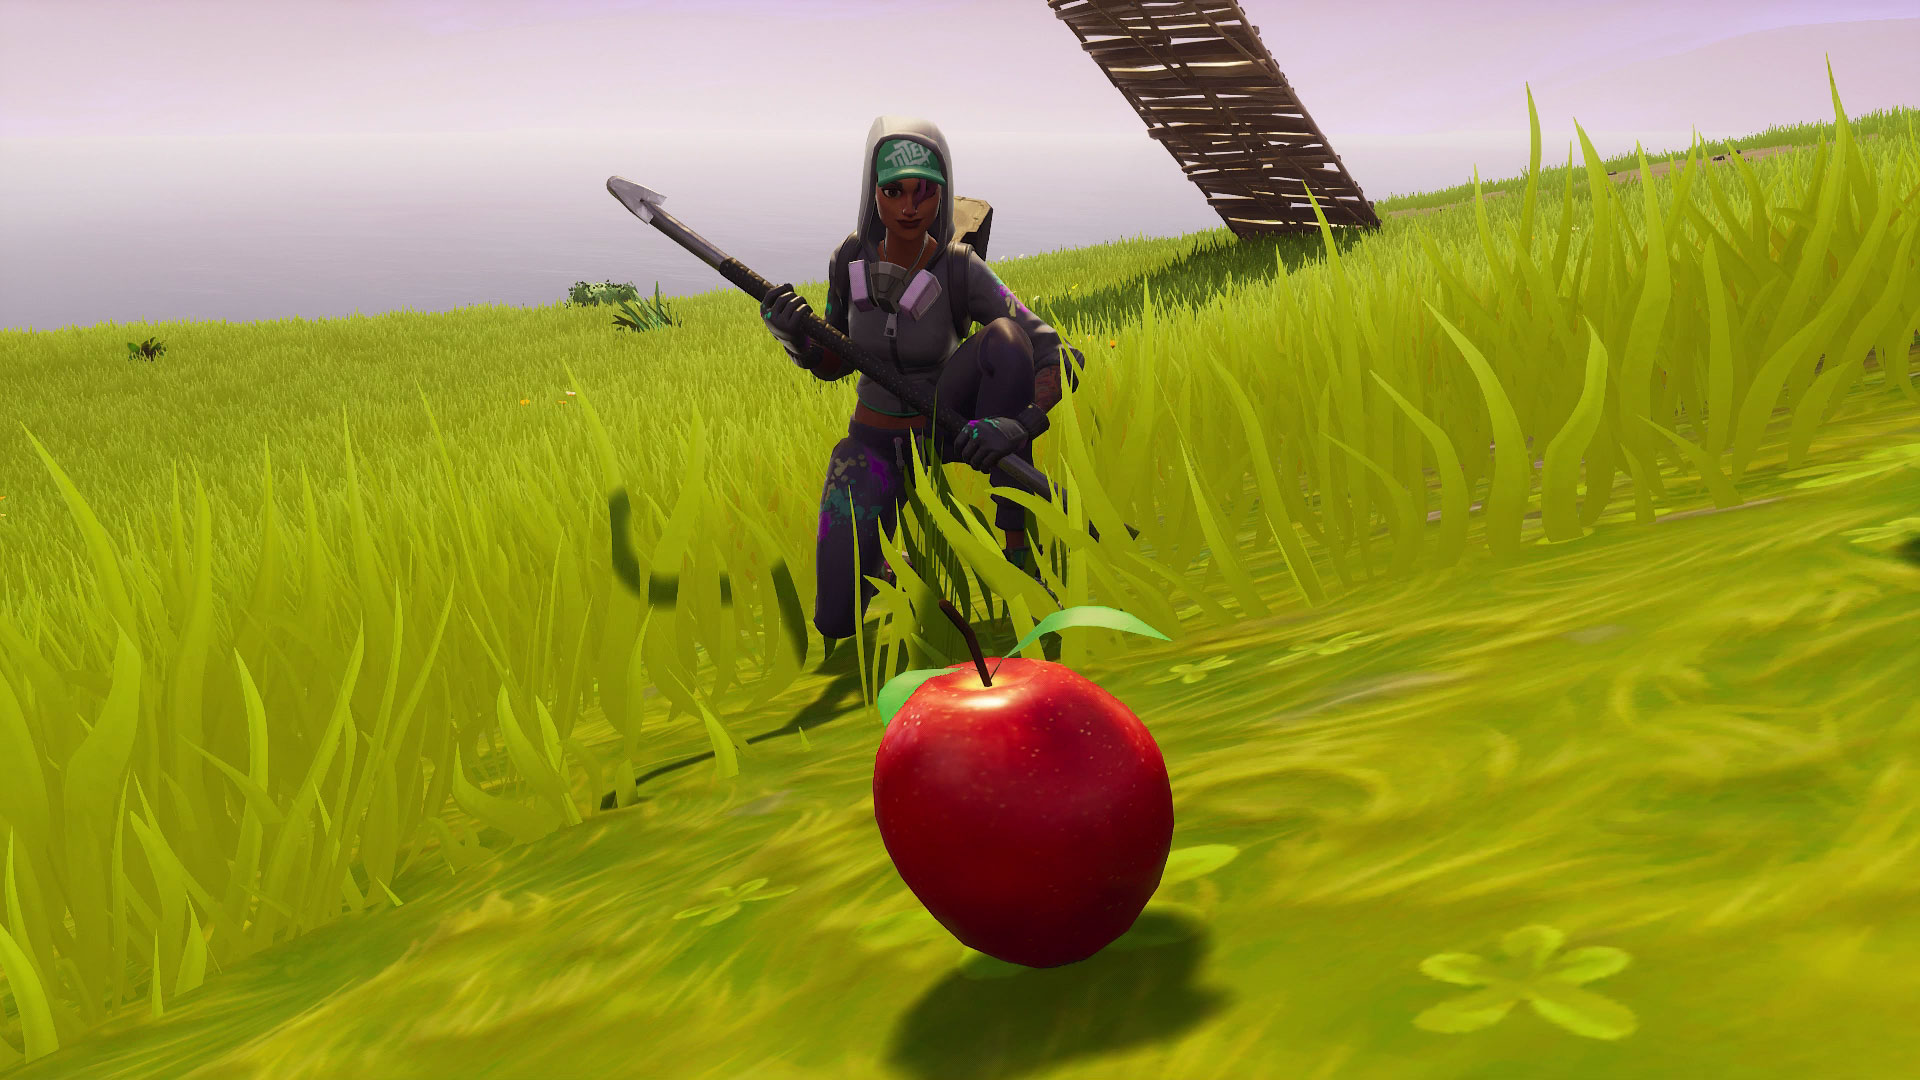 fortnite apple locations where to find fortnite apples and how to gain health from them gamesradar - apple tree locations in fortnite